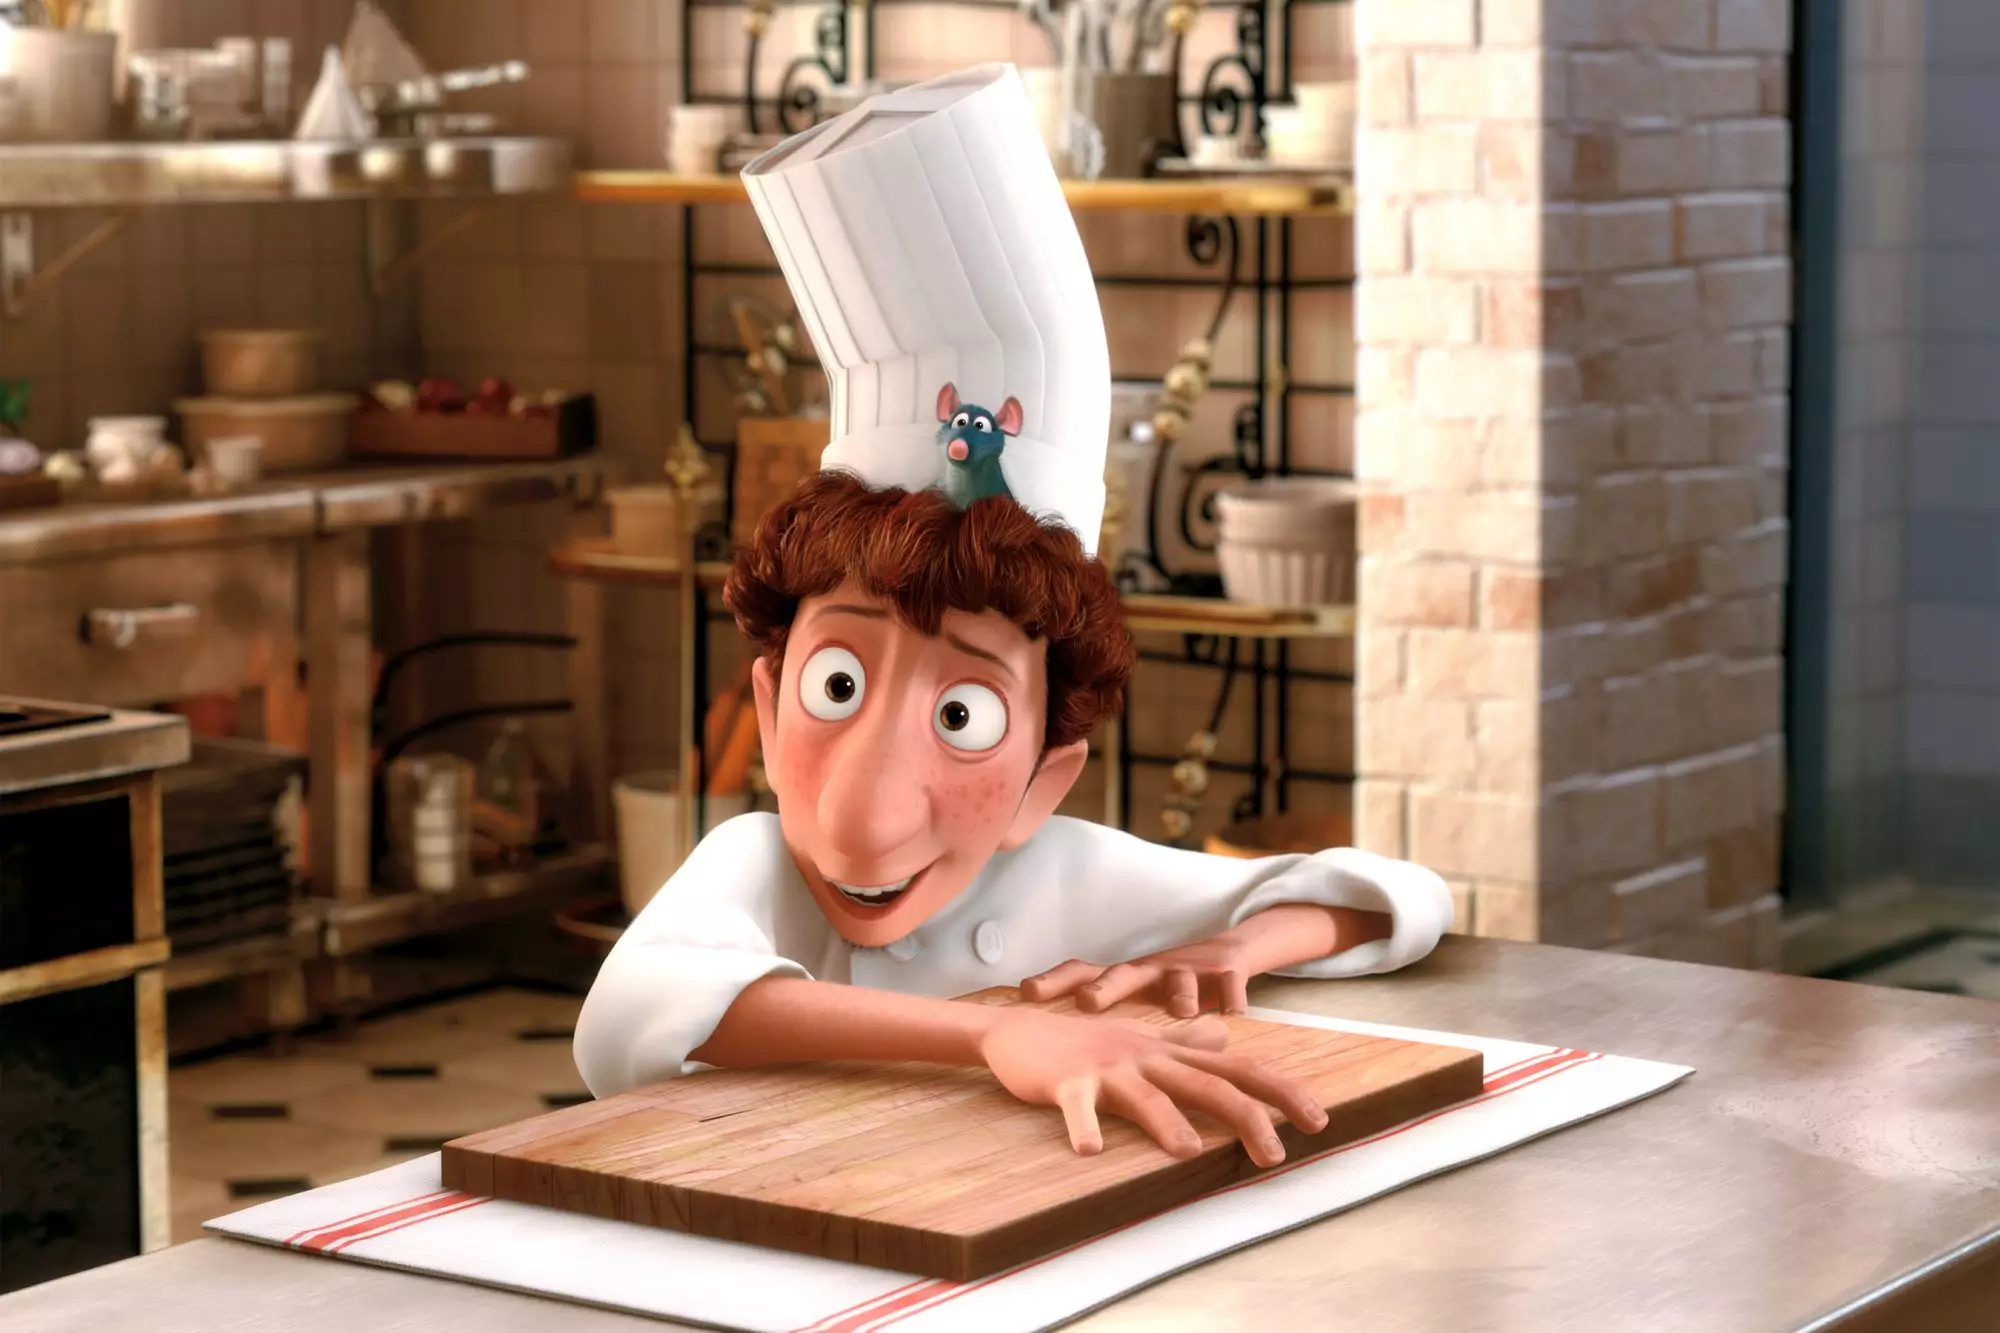 We're hoping for a 'Ratatouille' inspired recipe next (